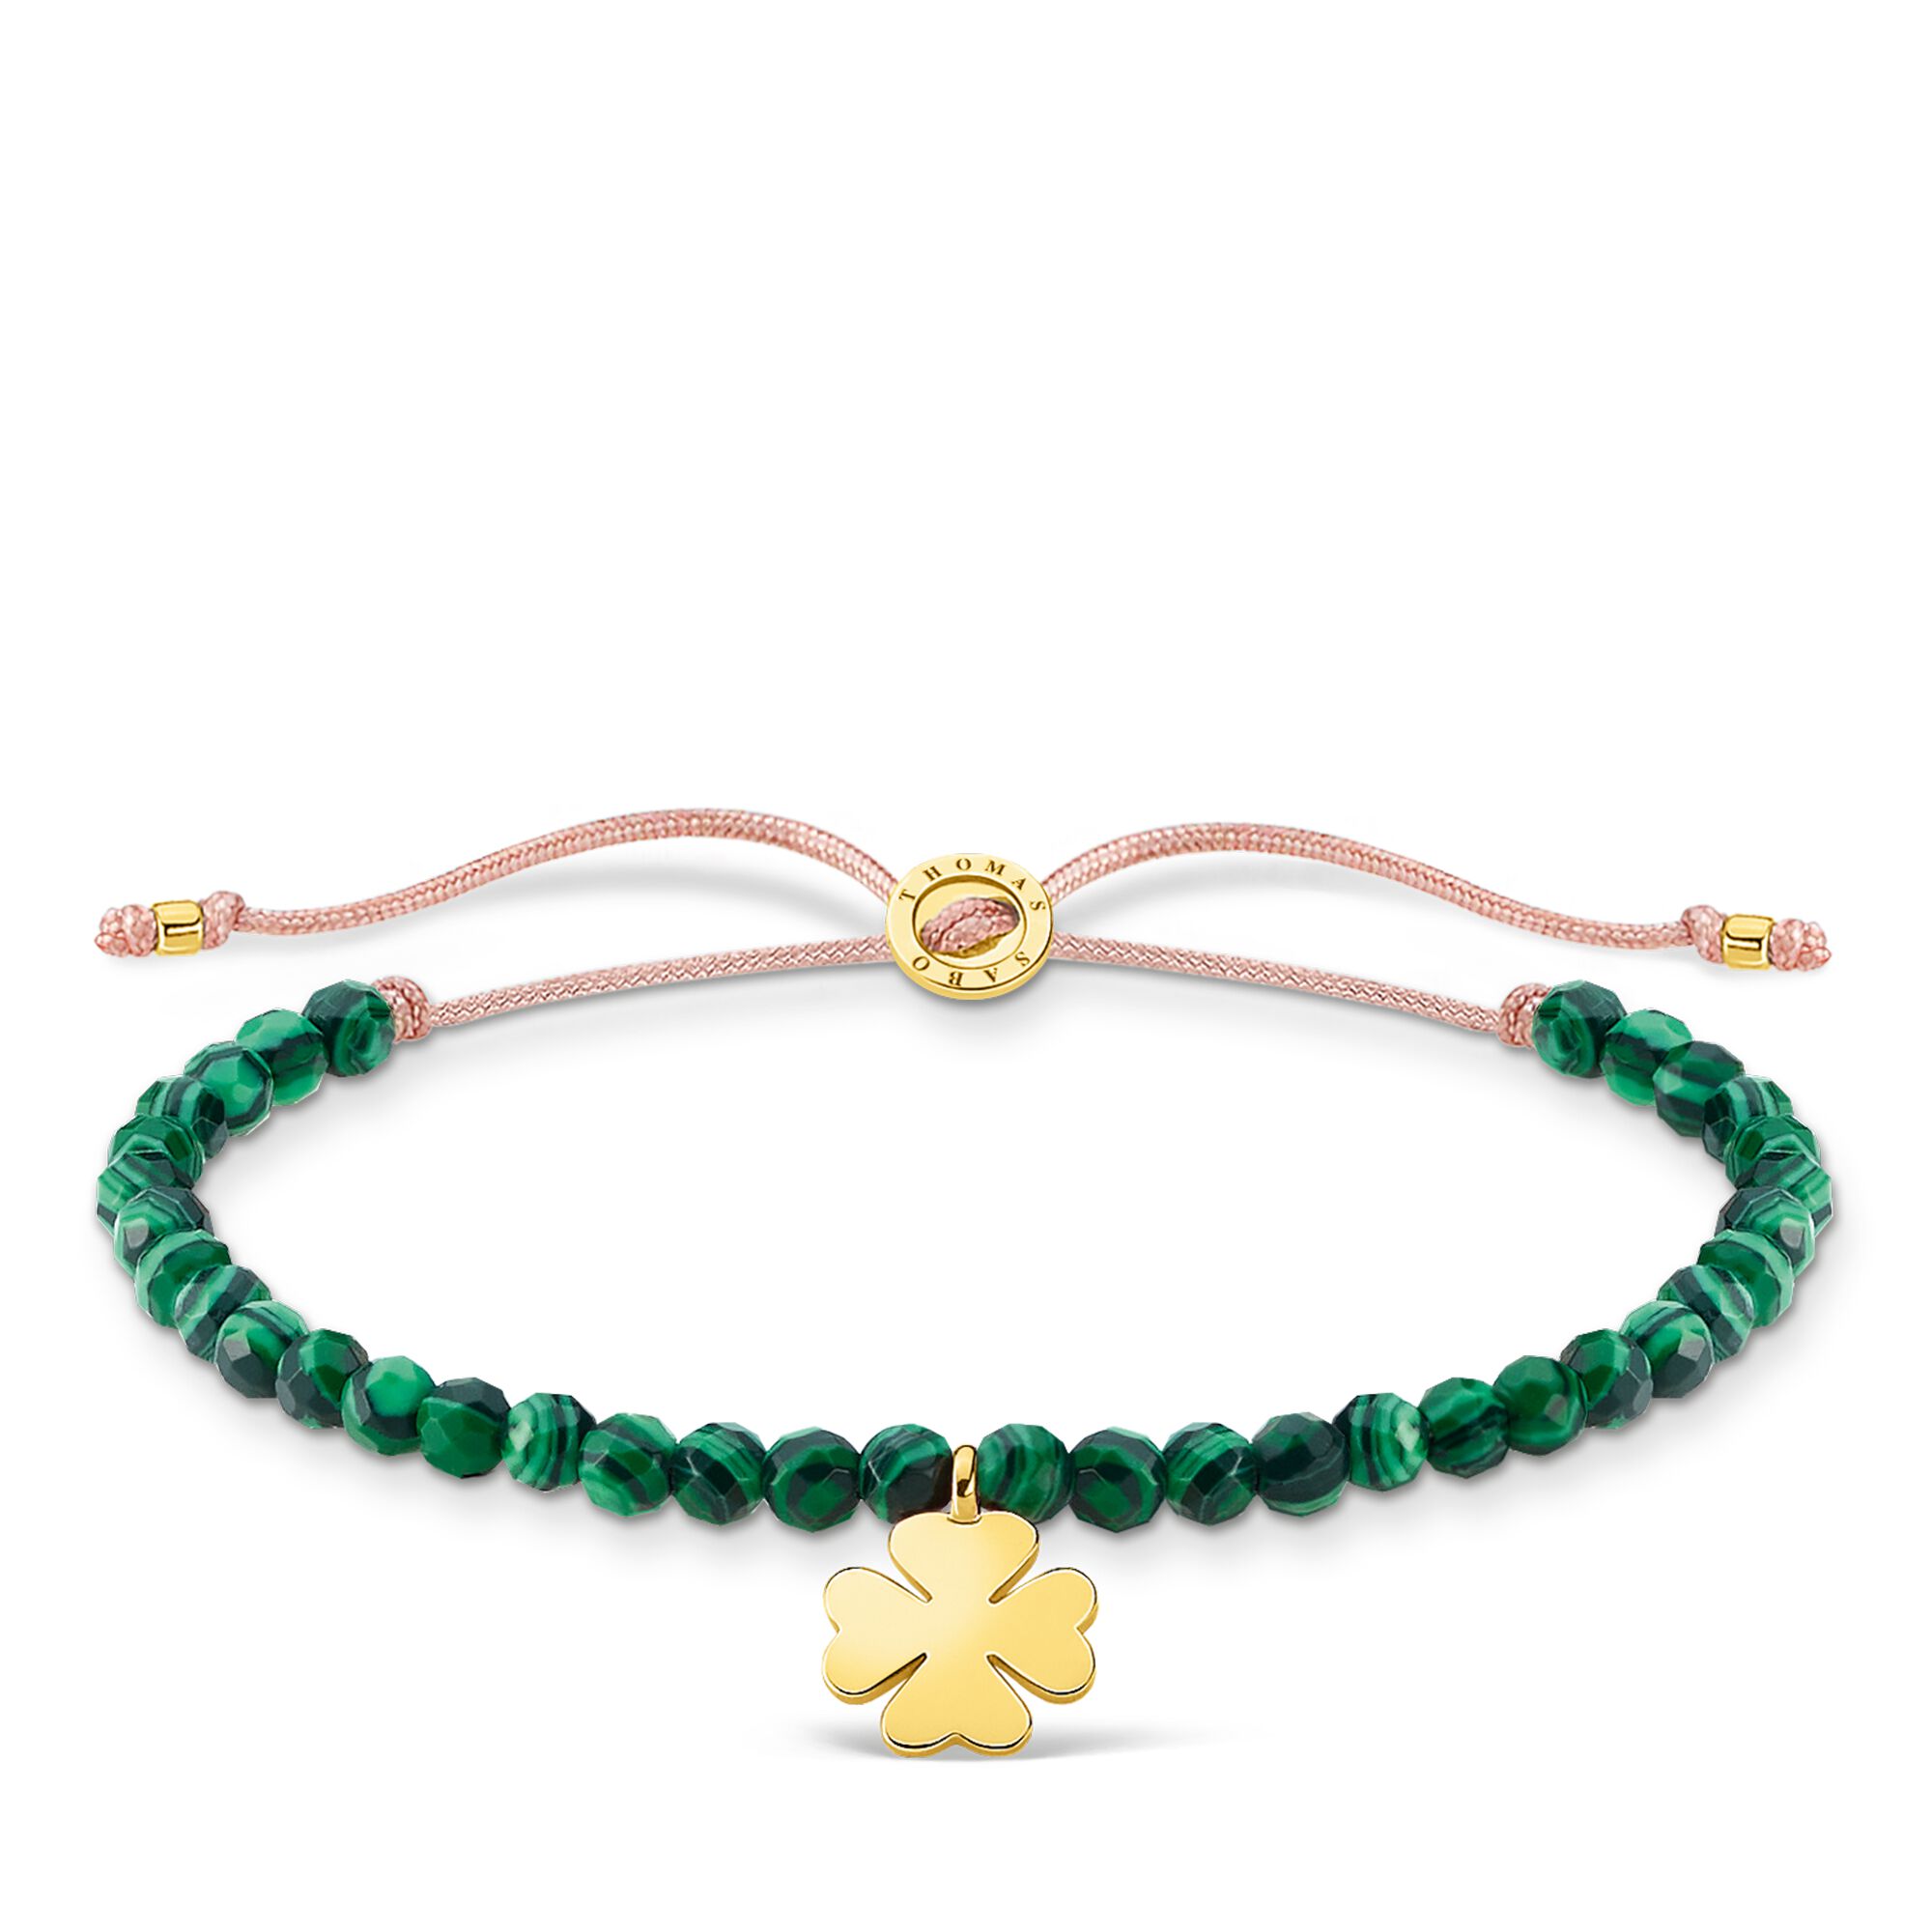 Wholesale Custom Bracelet with deep green malachiteand OEM/ODM Jewelry and 750 yellow gold-plated pendant oem